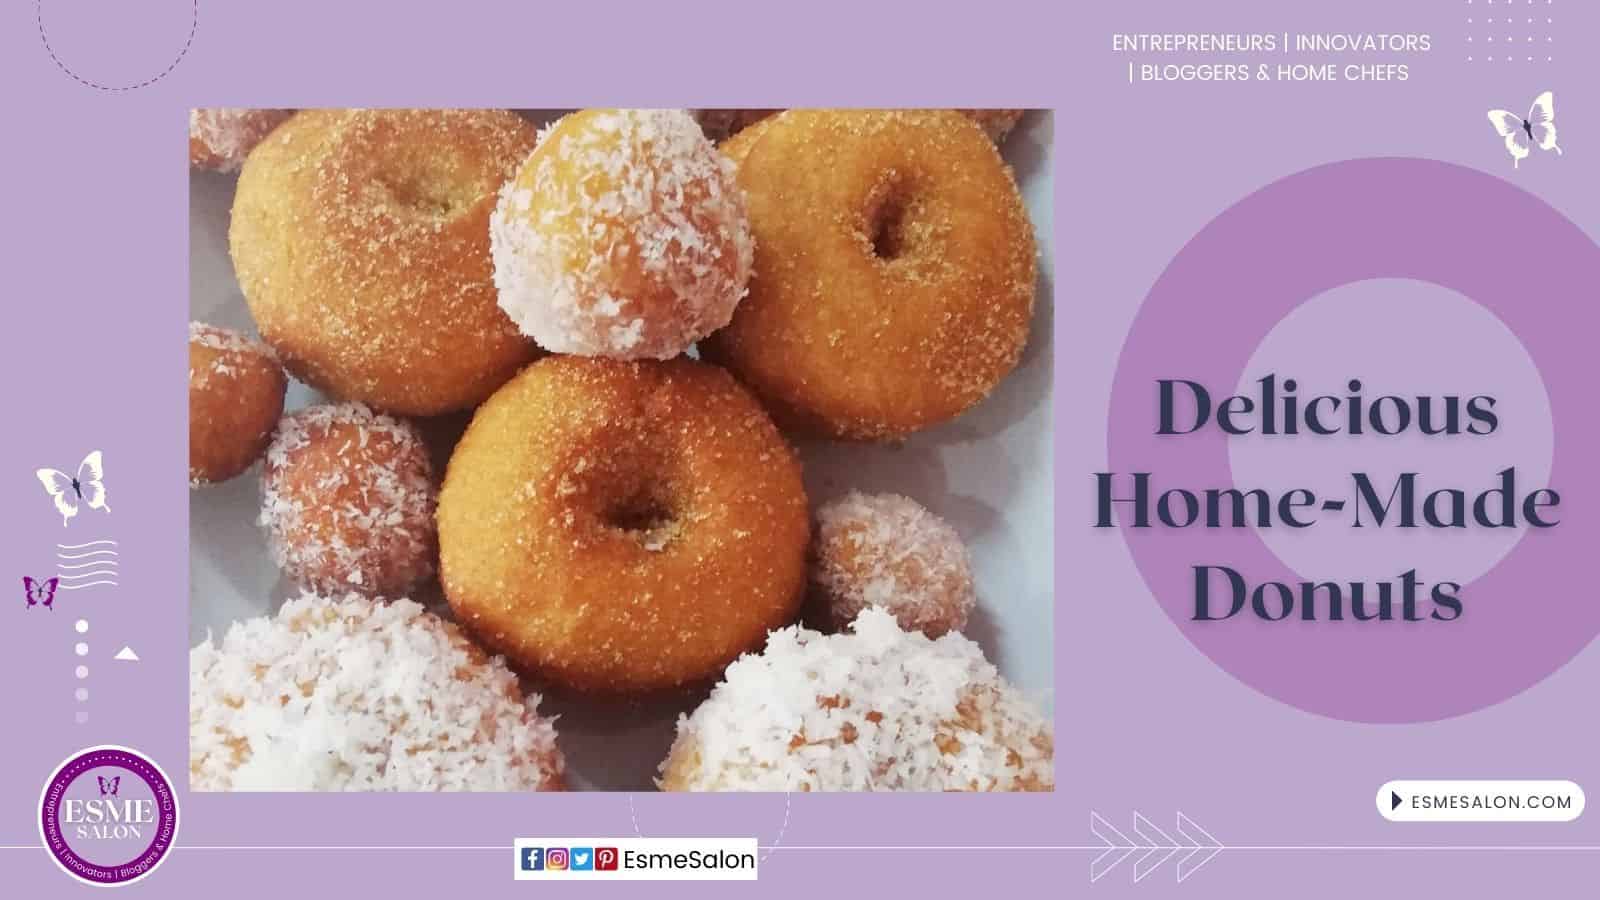 An image with numerous Delicious Home-Made Donuts rings and buttons and some covered in coconut